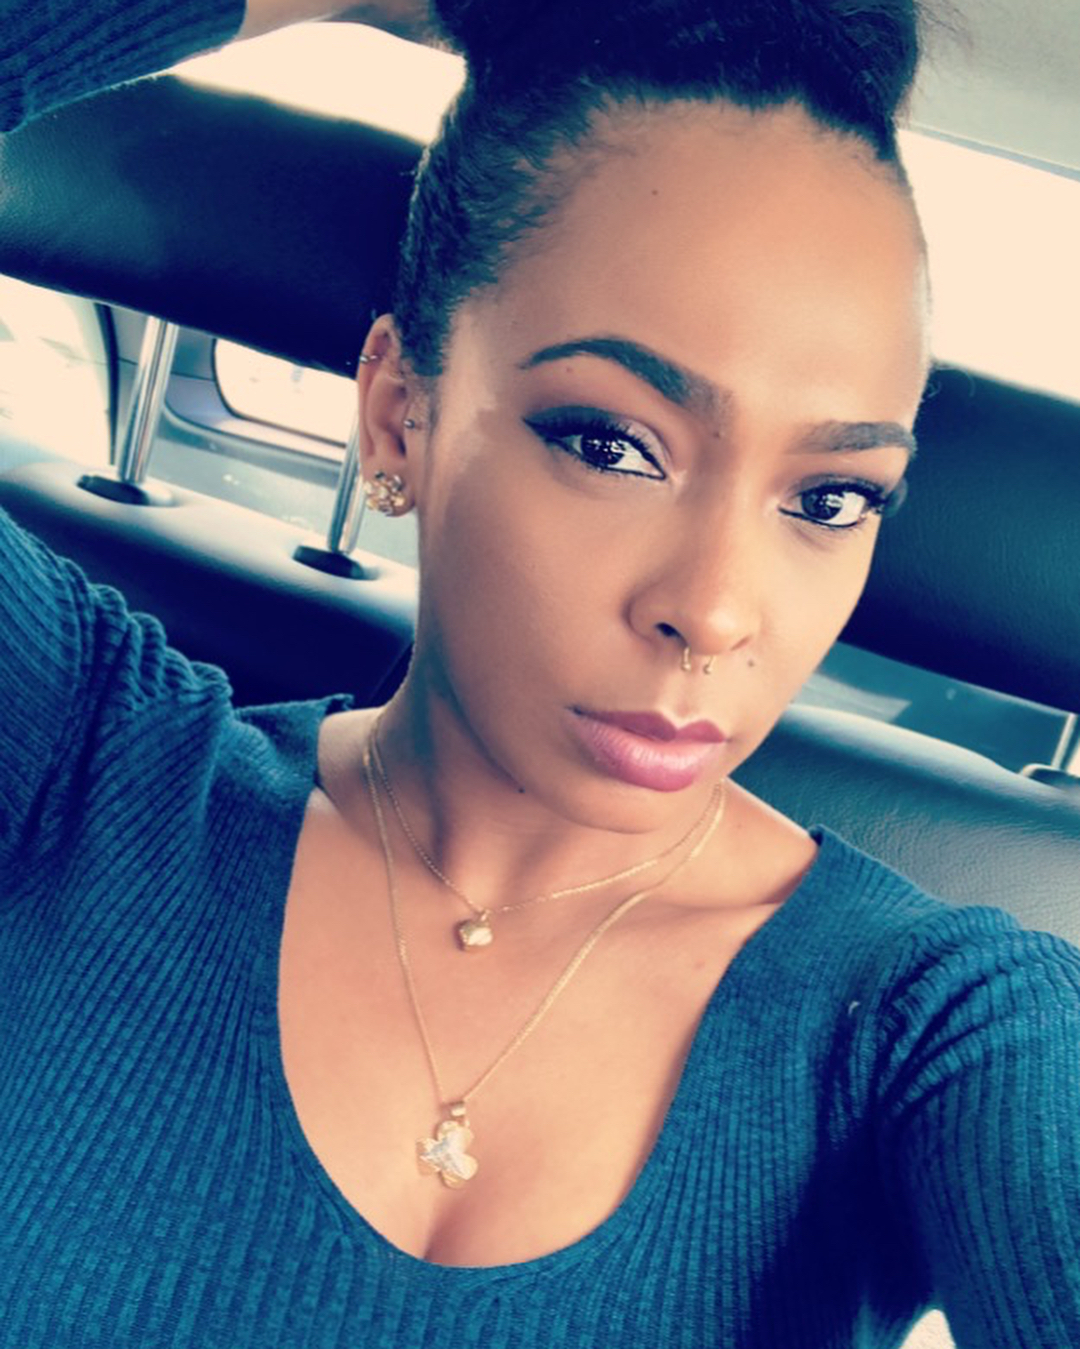 TBoss humbles follower who attacked her on Instagram.